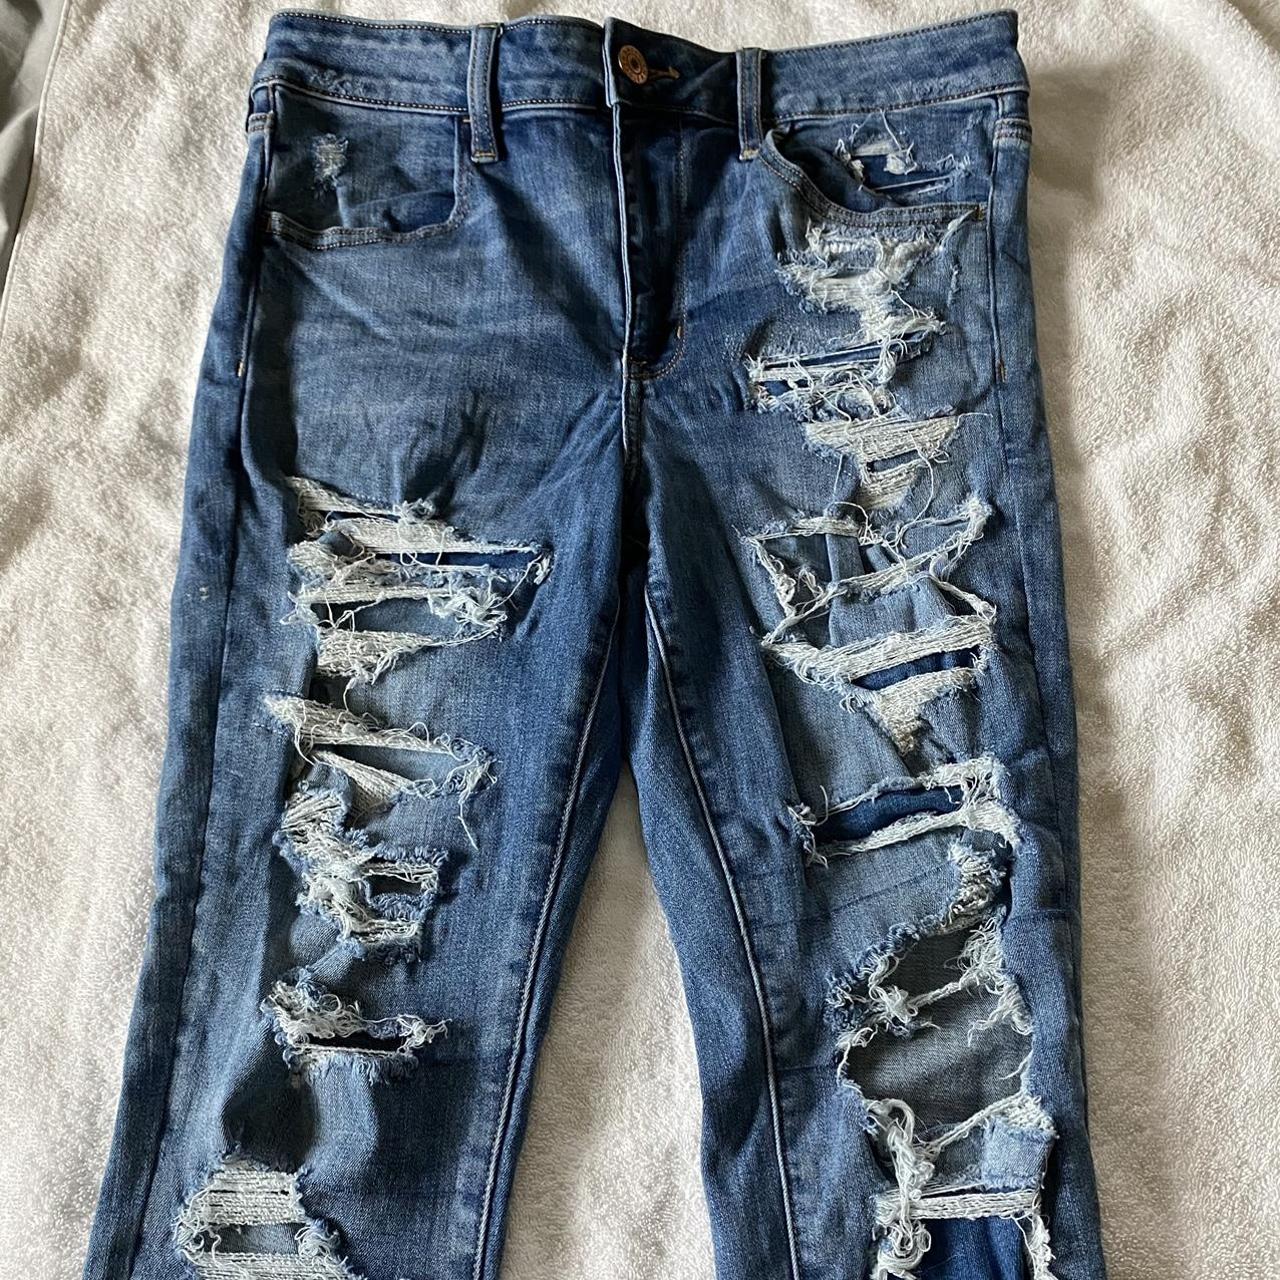 Preloved american eagle distressed/ripped jeans!! - Depop